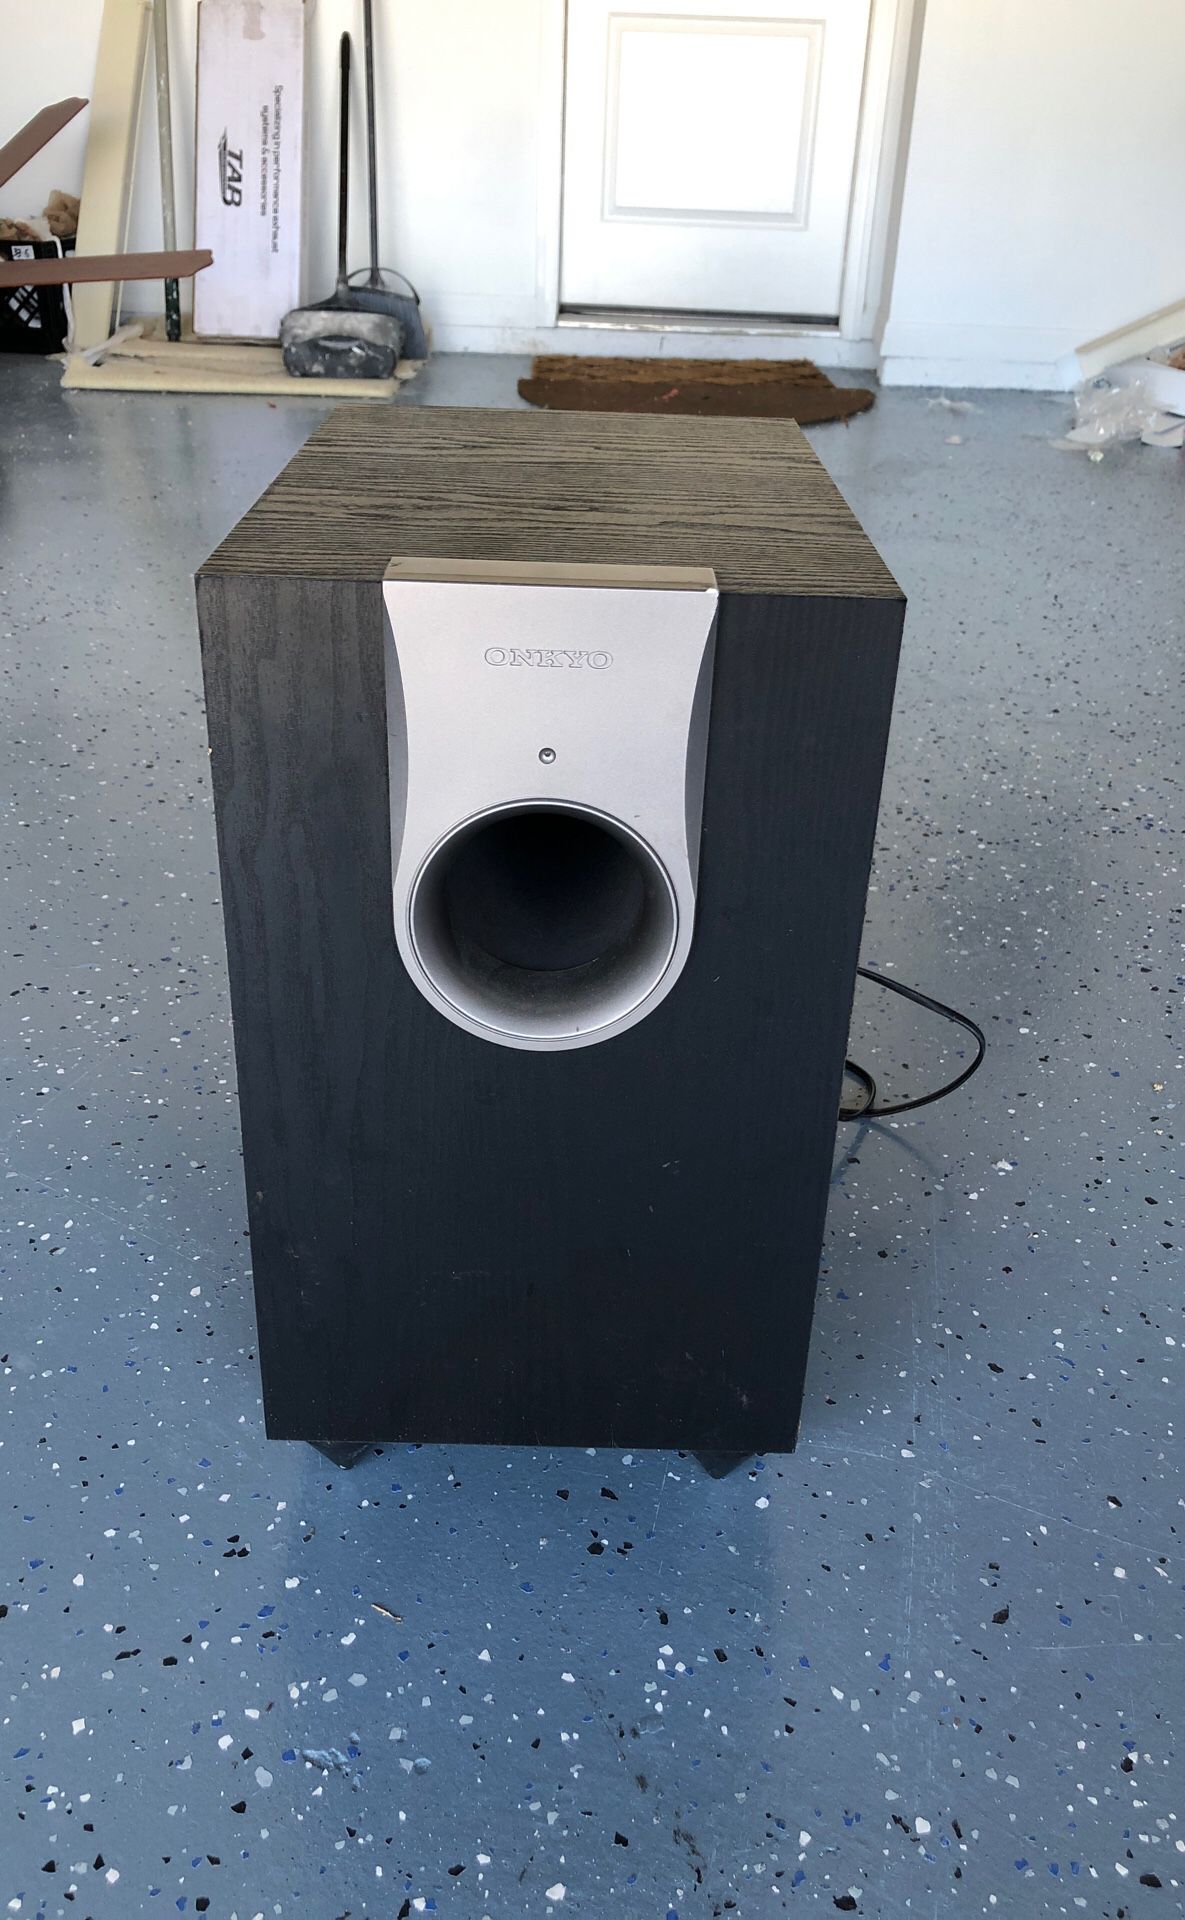 ONKYO SUBWOOFER, WORKS PERFECT VERY LOUD